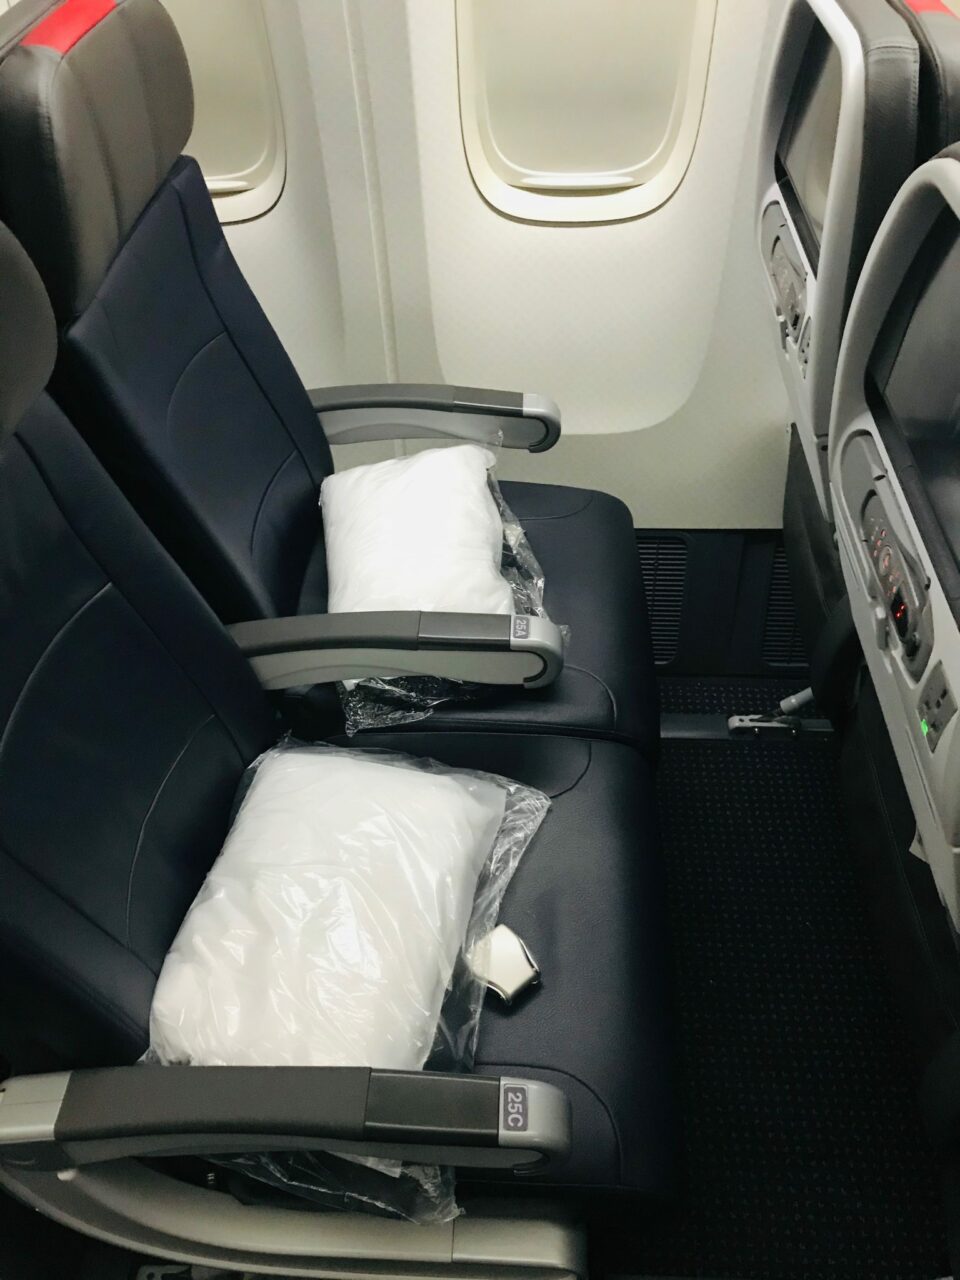 American Airlines economy class seat 